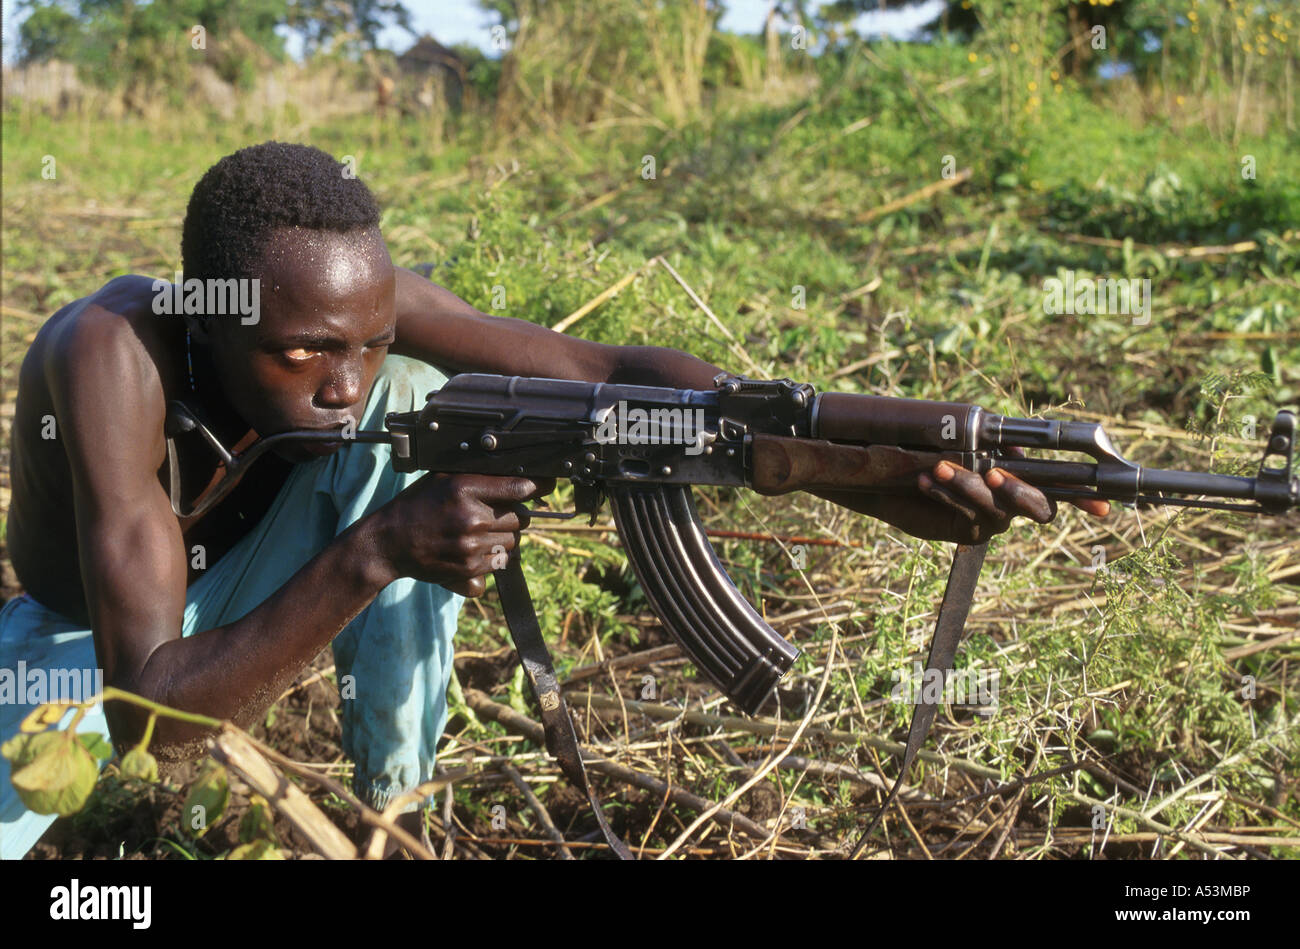 Painet ha1621 3262 south sudan spla soldier gun rifle weapon chukudum country developing nation less economically developed Stock Photo